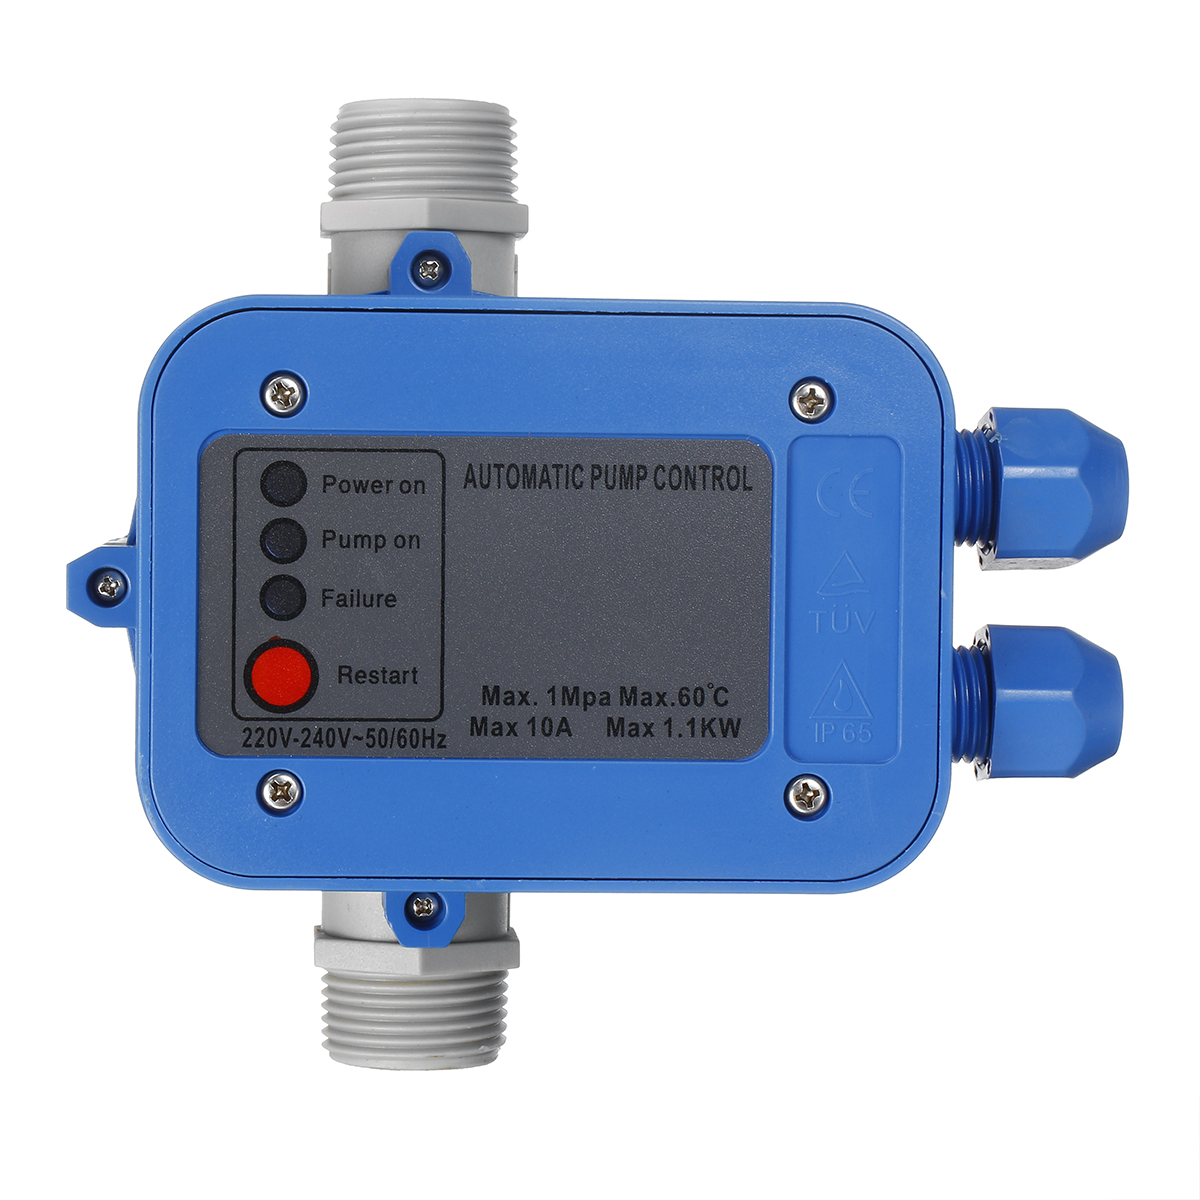 

10A 1.1KW 1Mpa 10Bar Water Valve Automatic Pump Controller Switch Accessories 220V-240V